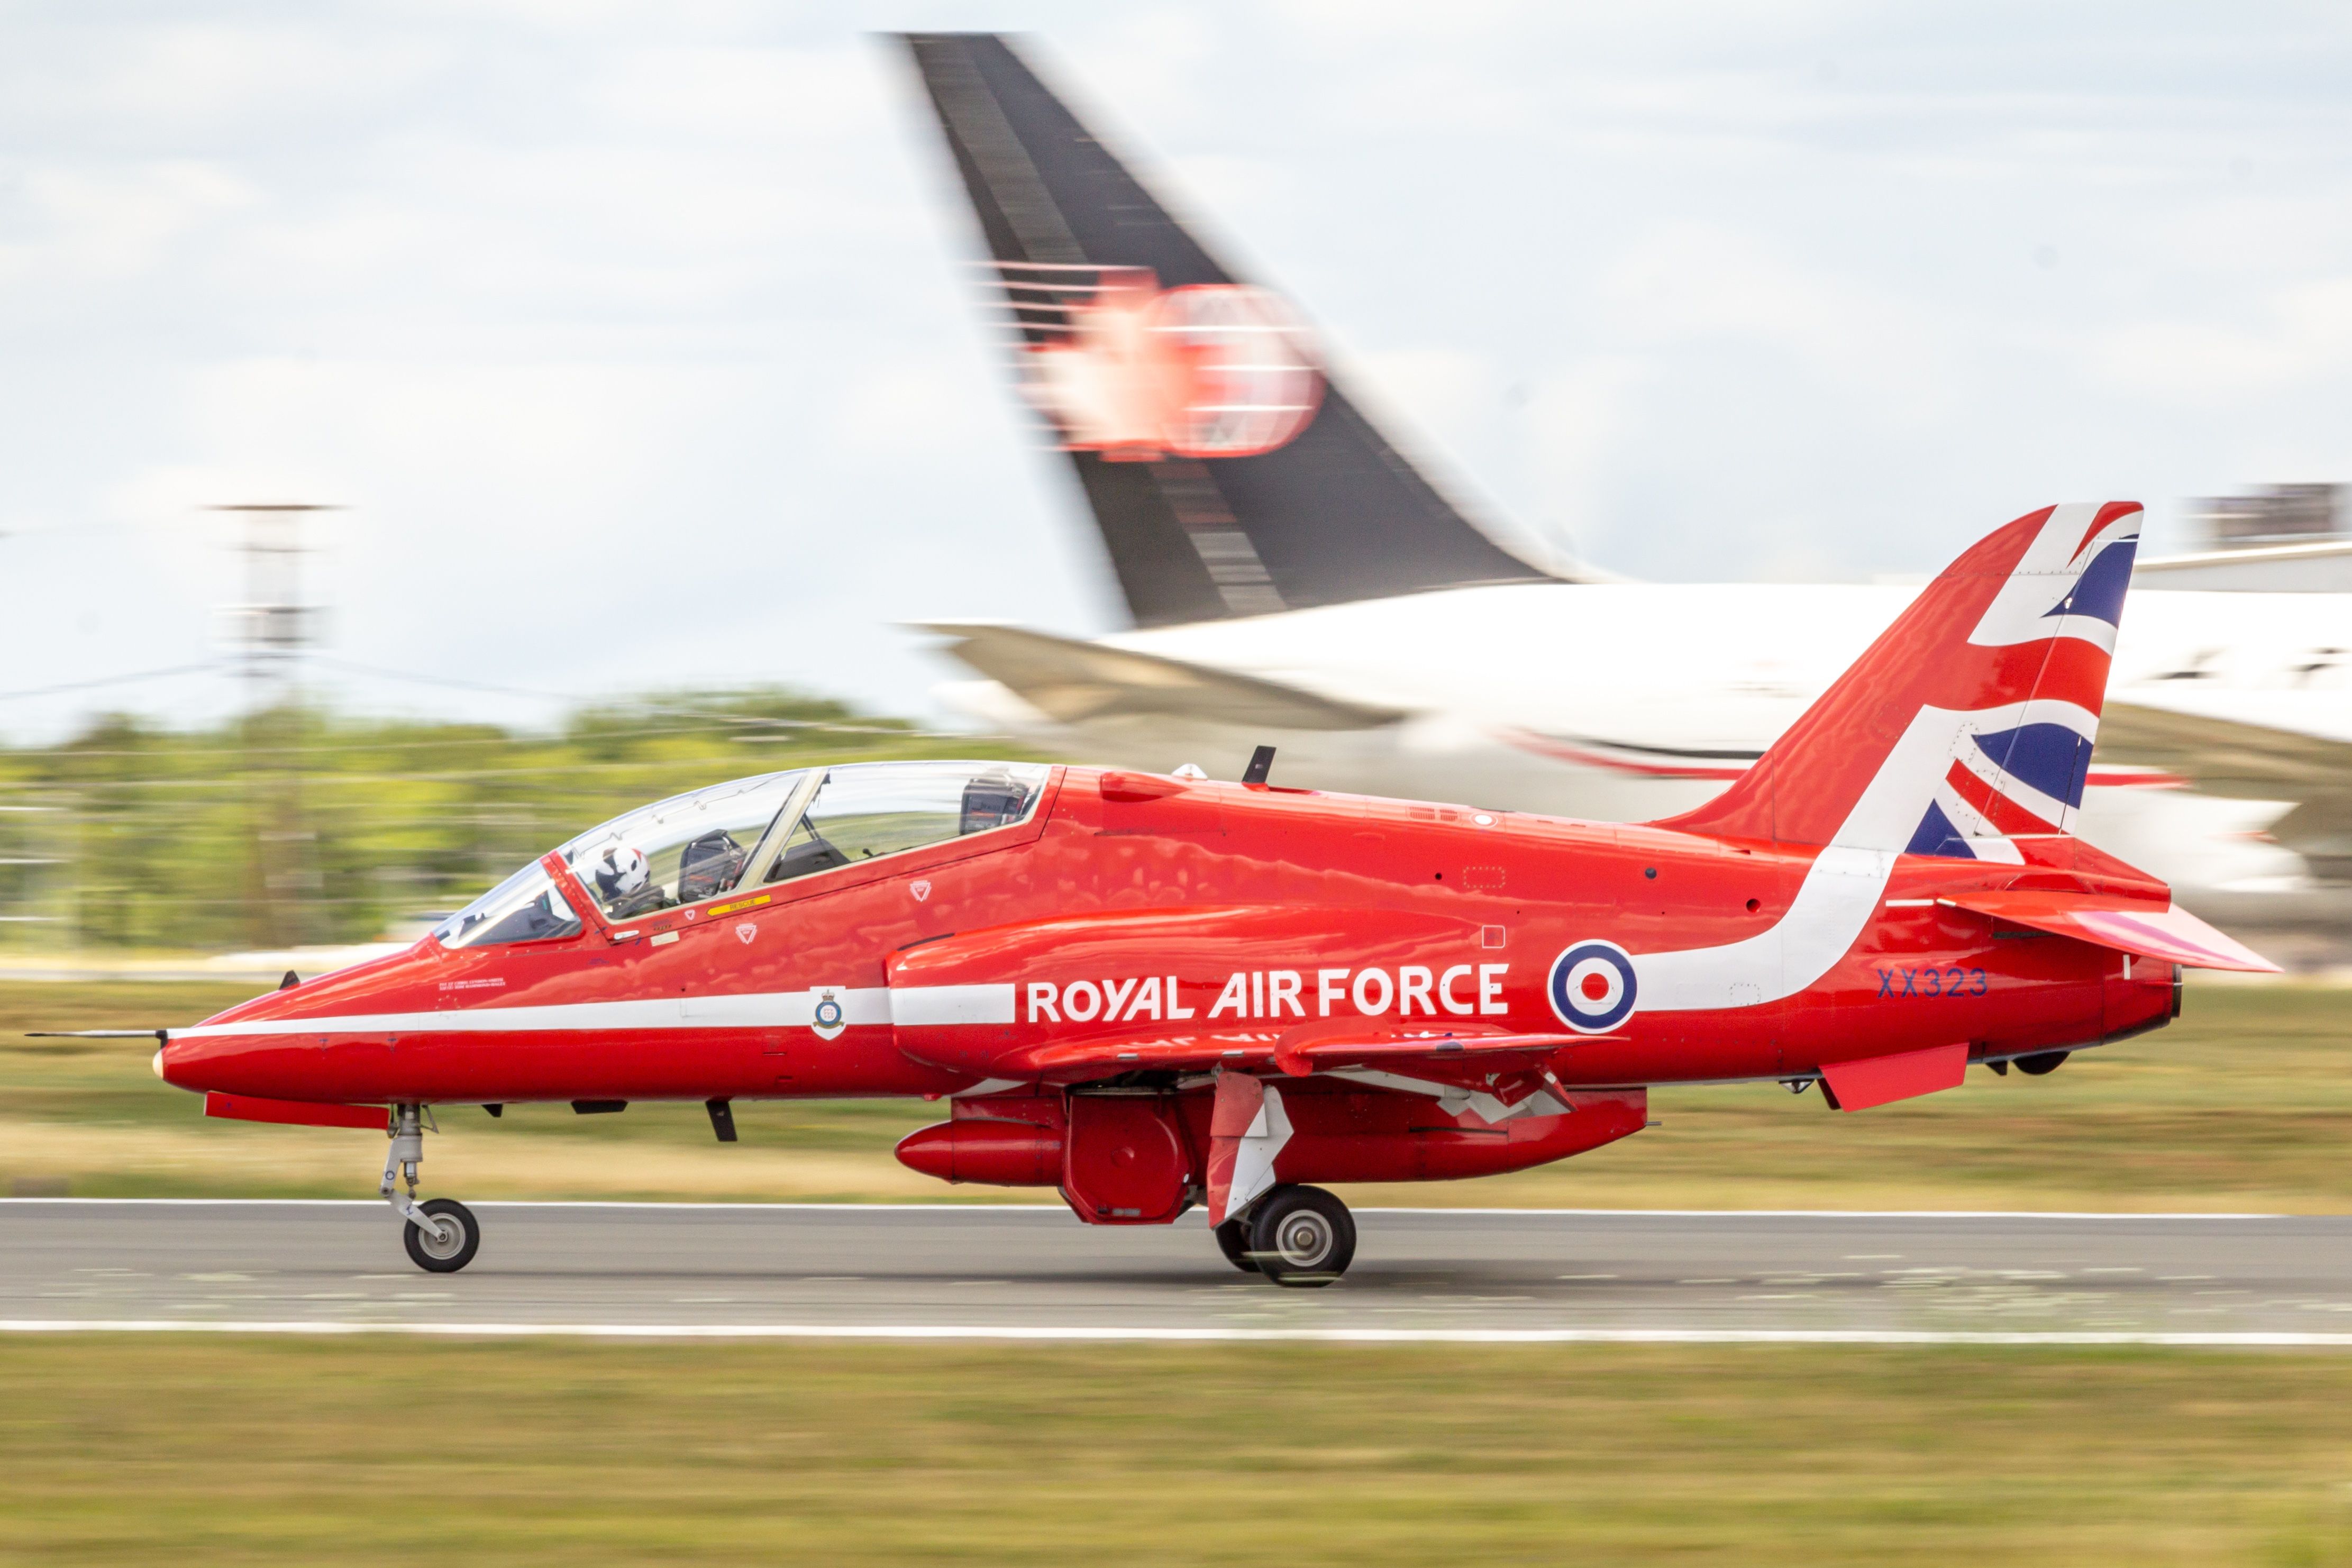 Boeing Goshawk (XX323) - One of the RAF Red Arrows arriving at YHZ. The first stop of their 2019 North American Tour